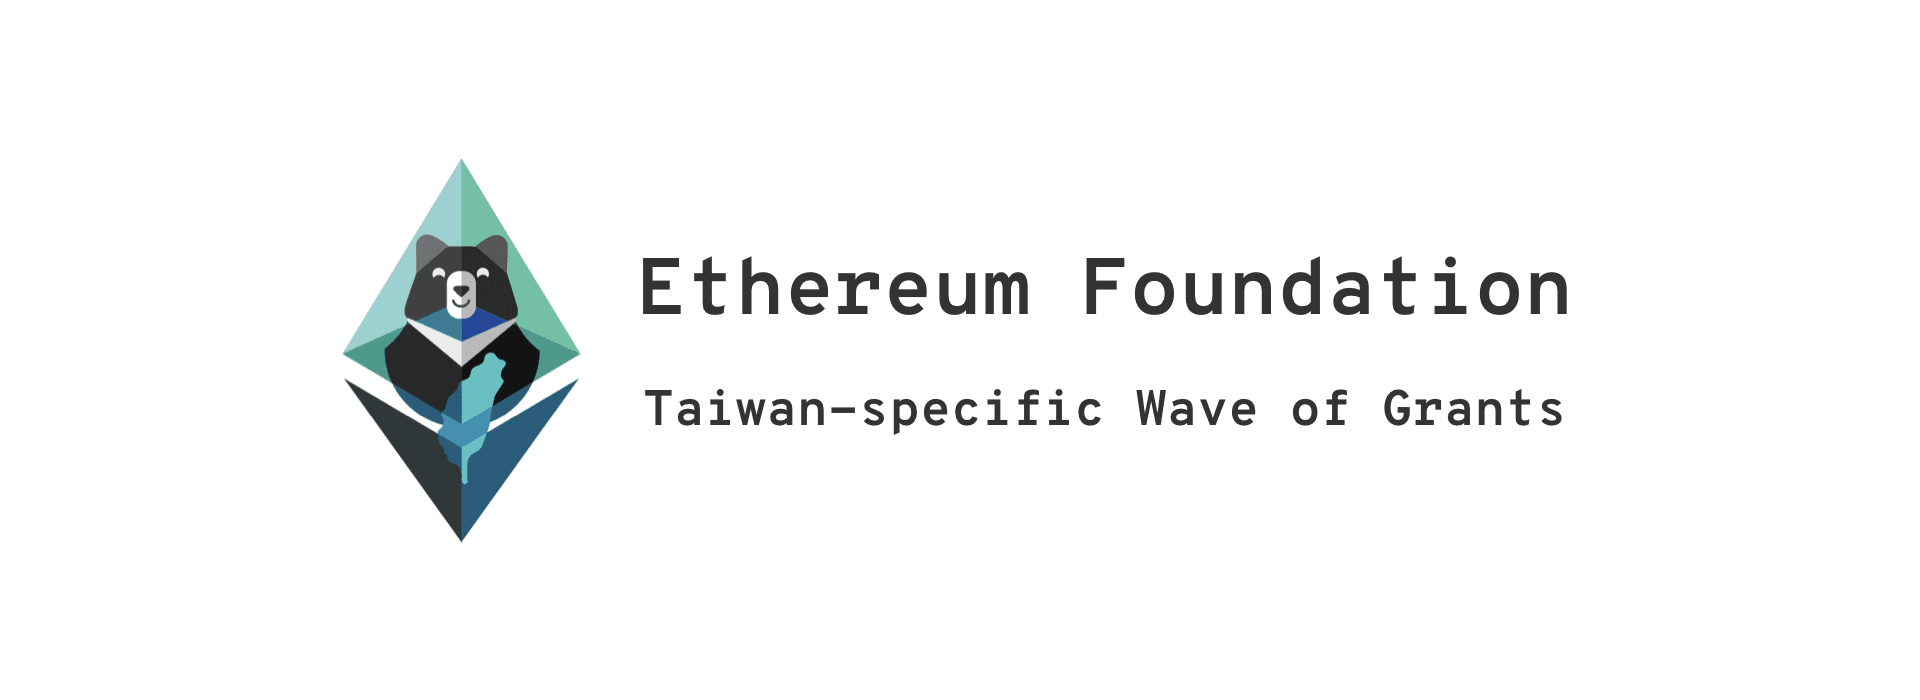 Announcing a Taiwan-specific Wave of Grants